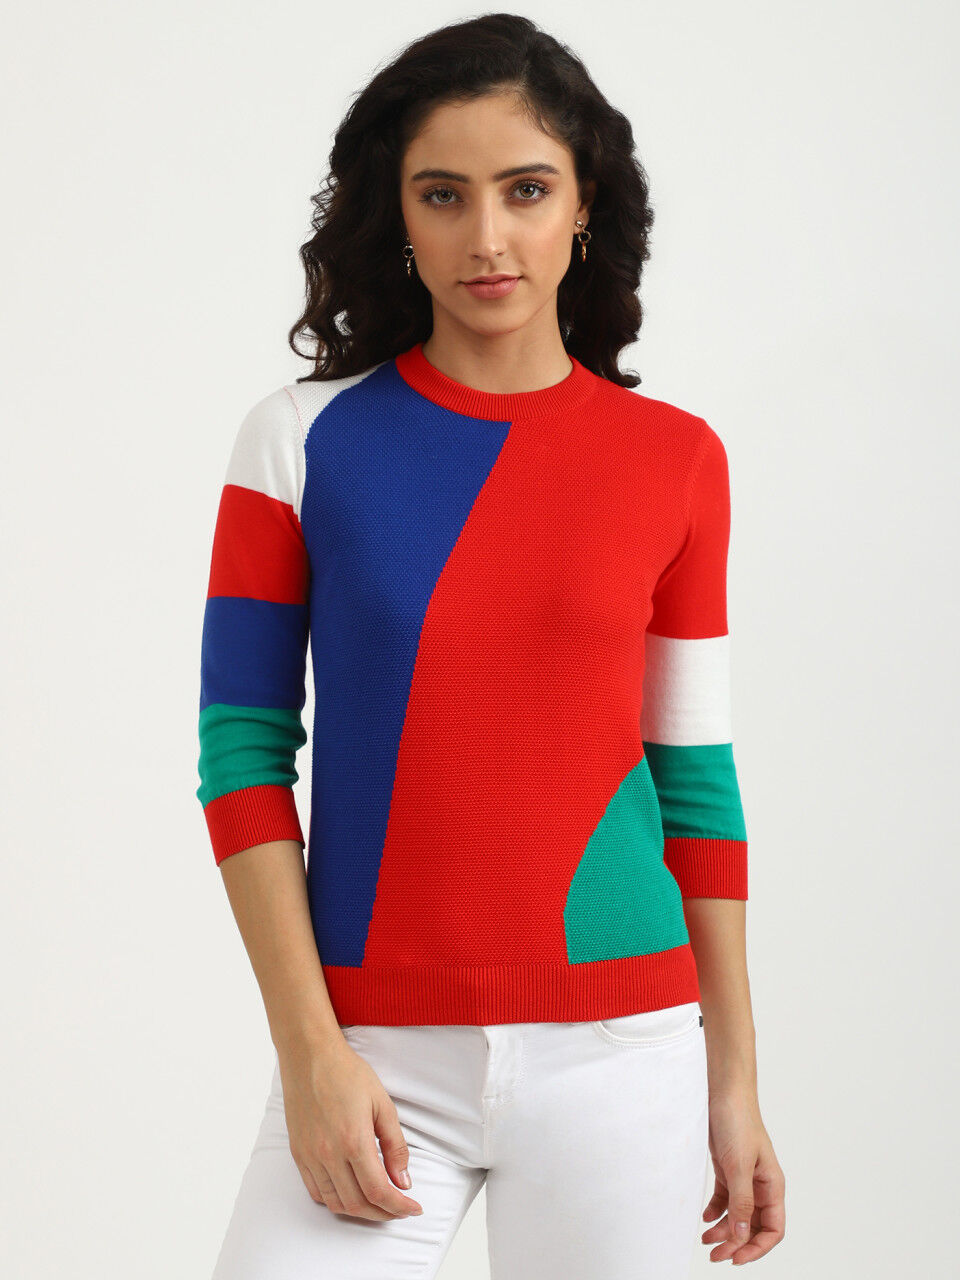 WOMEN FASHION Jumpers & Sweatshirts Jumper Casual discount 98% United colors of benetton jumper Yellow M 